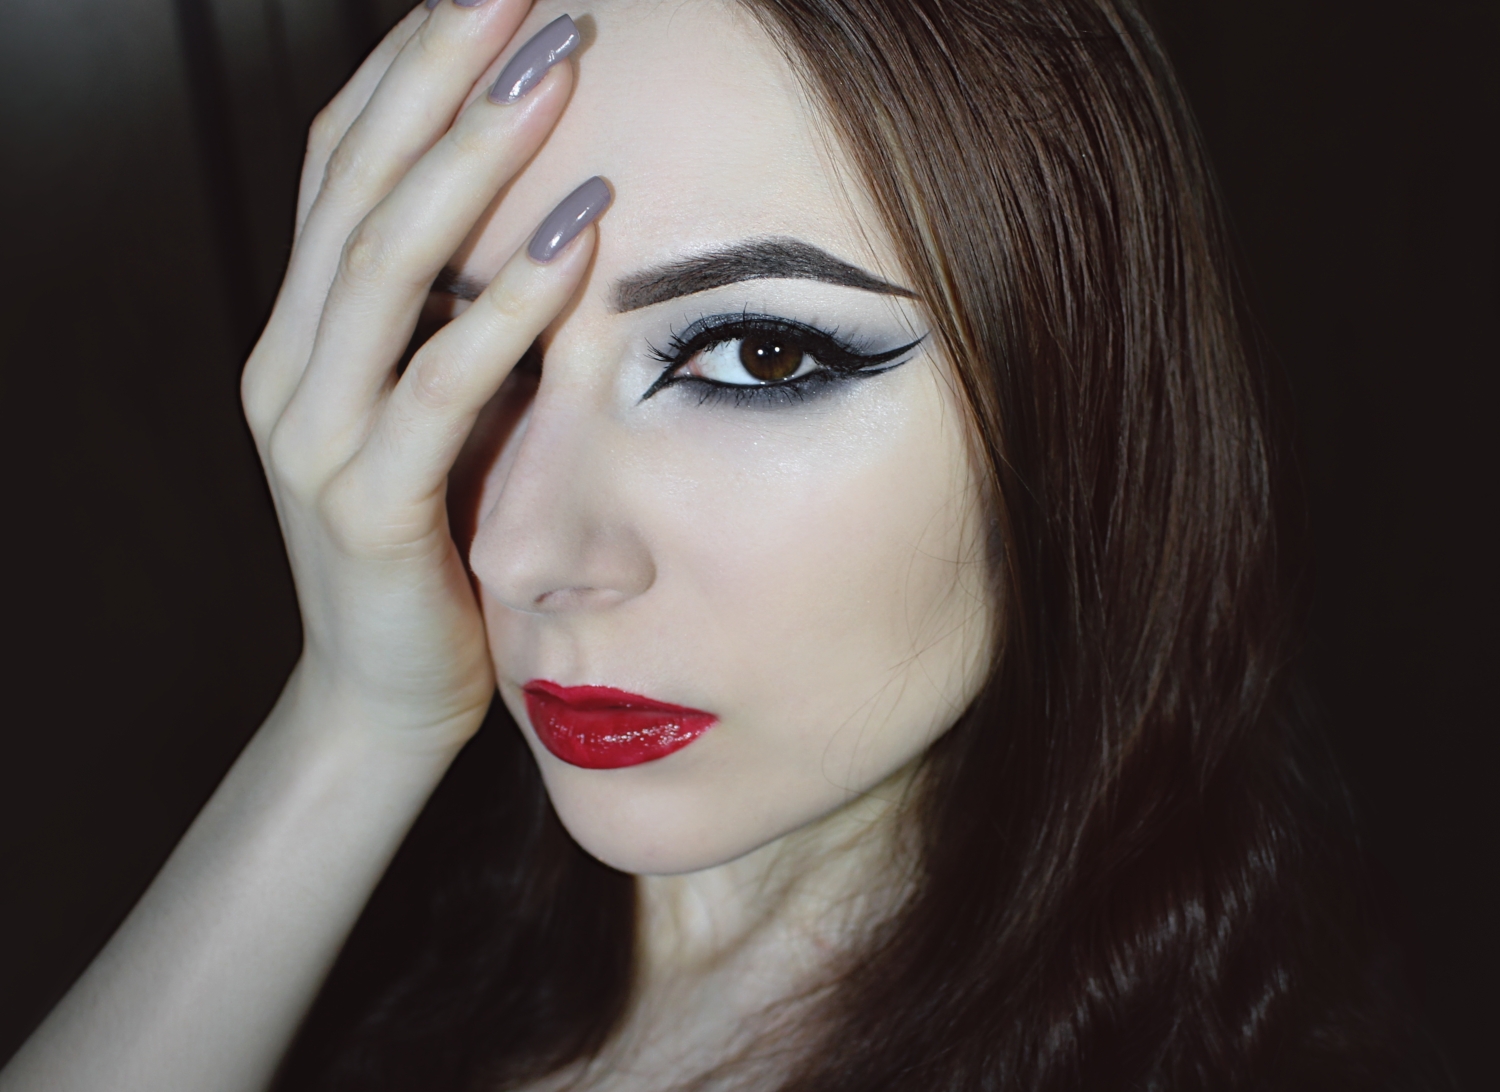 girl with smoky eye makeup, double eyeliner and red glossy lips is showing her makeup